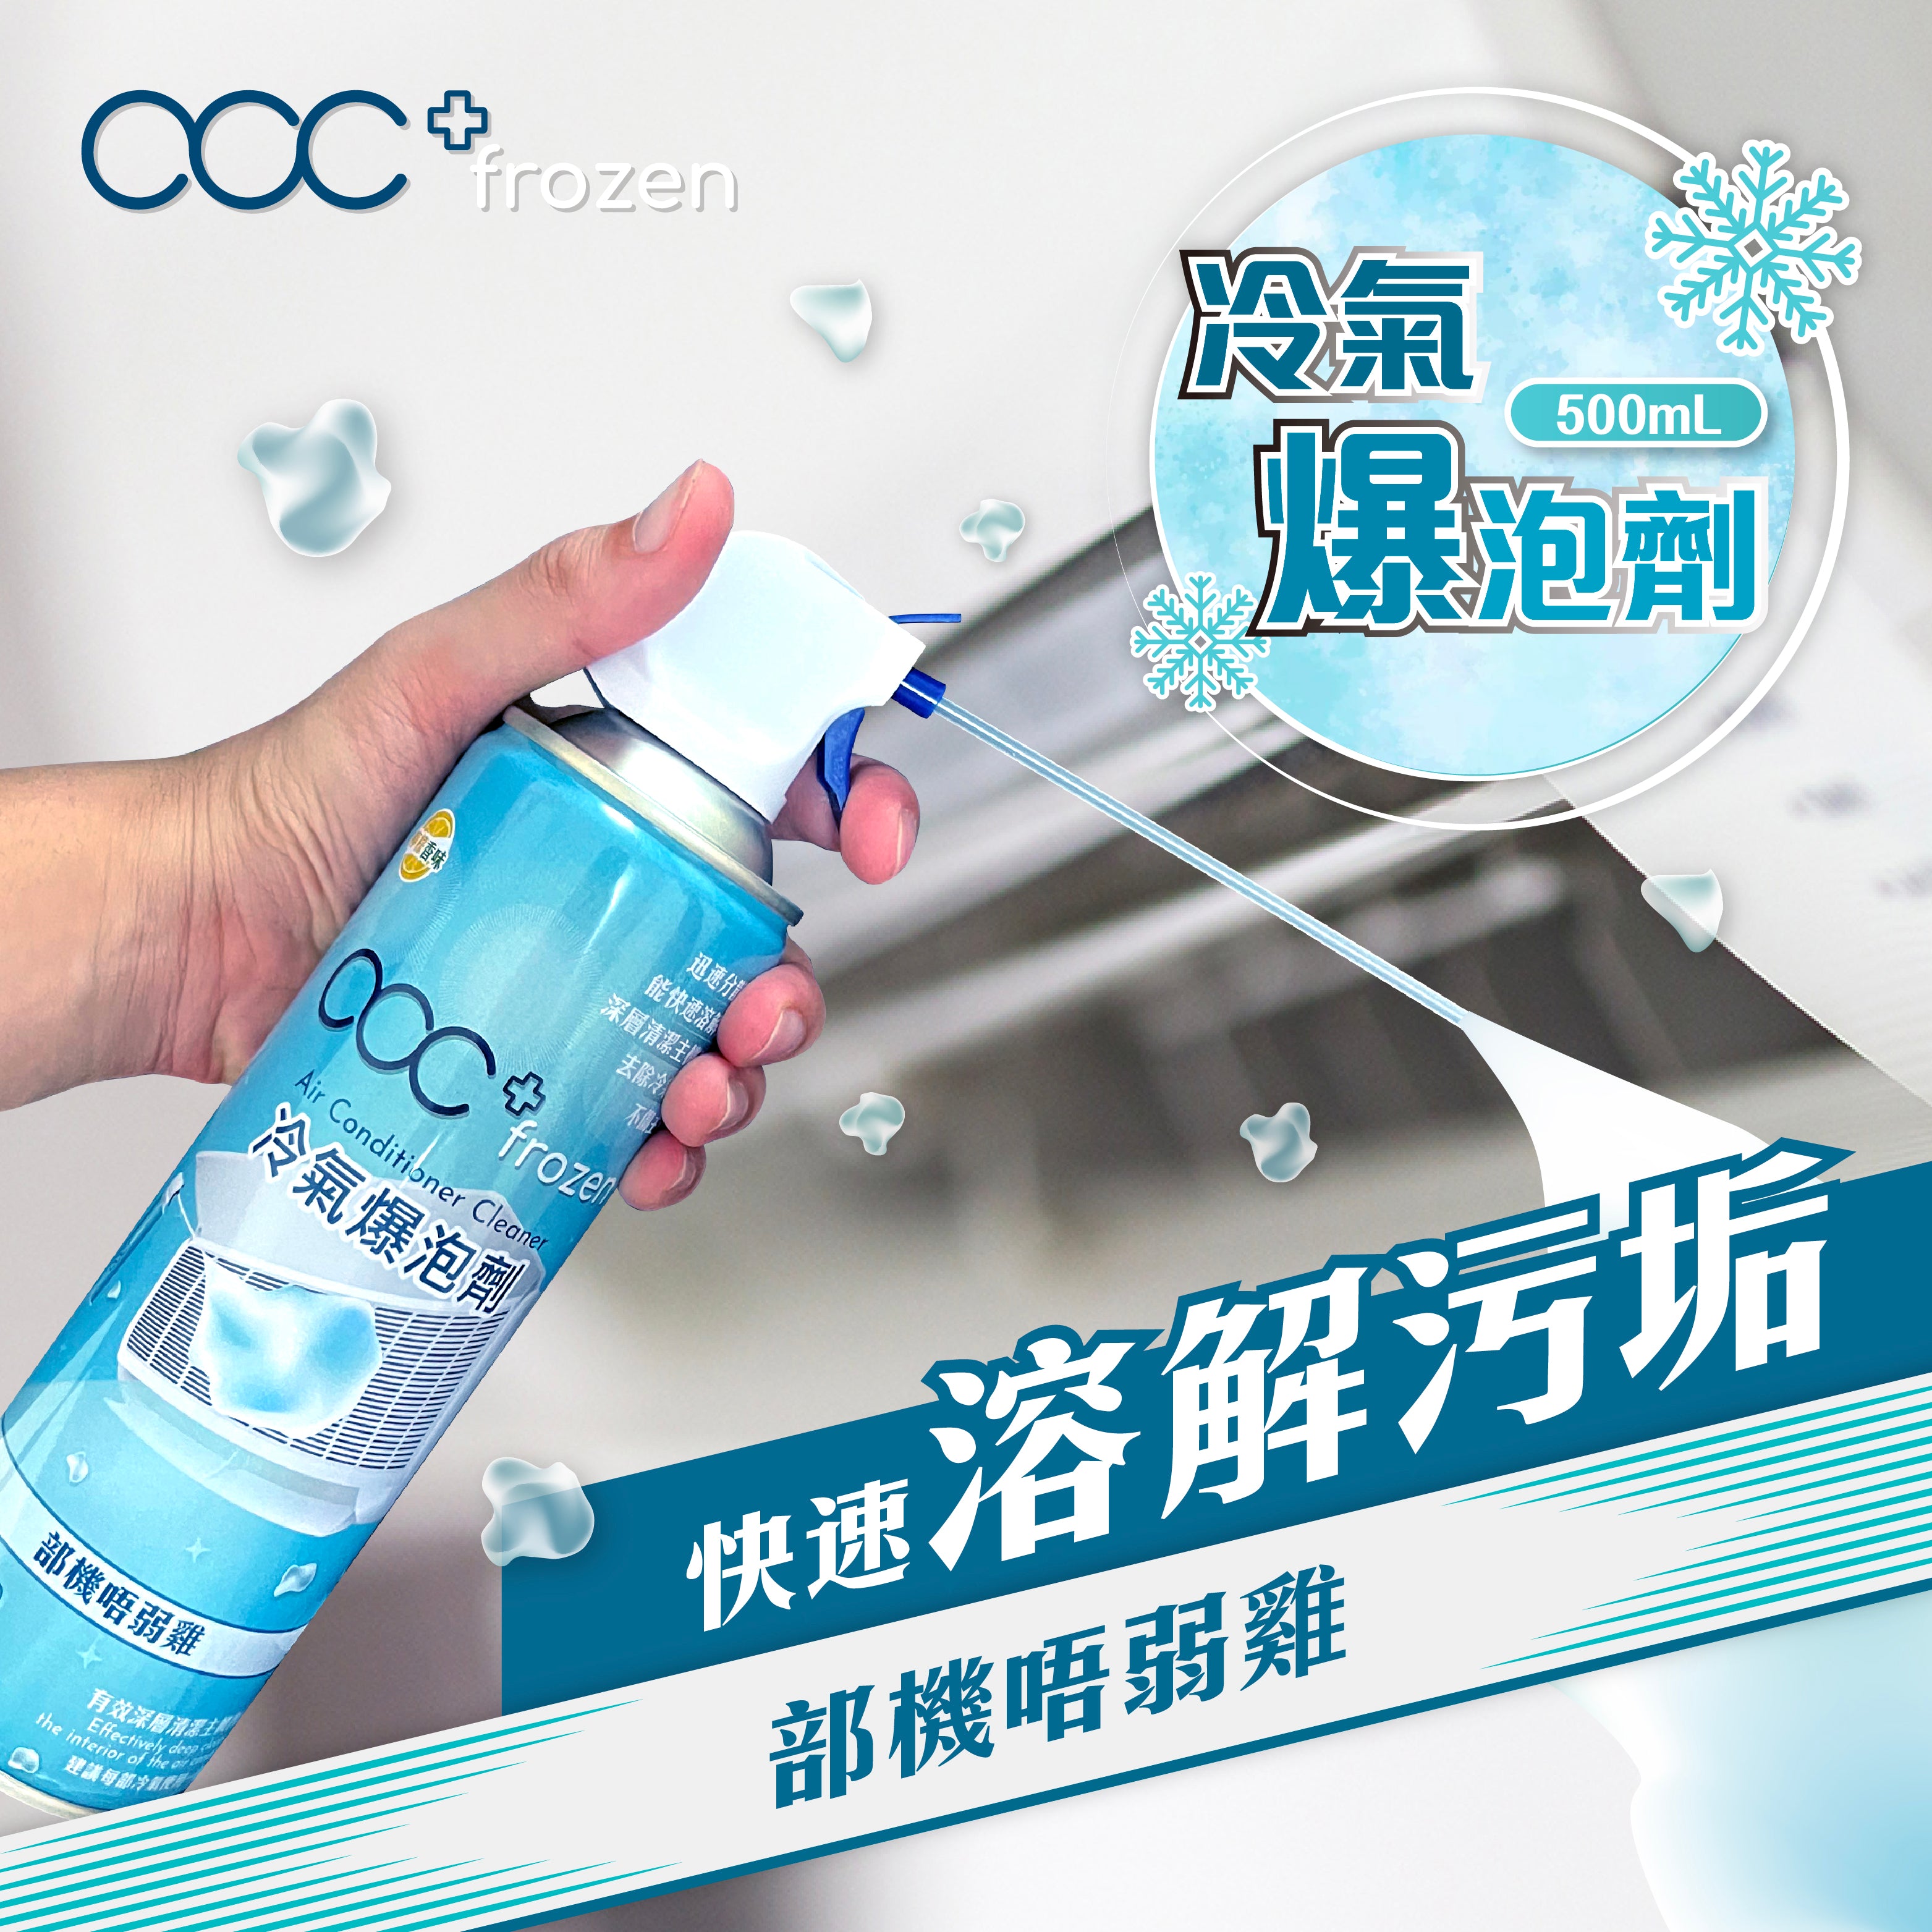 acc+ frozen air conditioner popping agent is on sale at an affordable price 